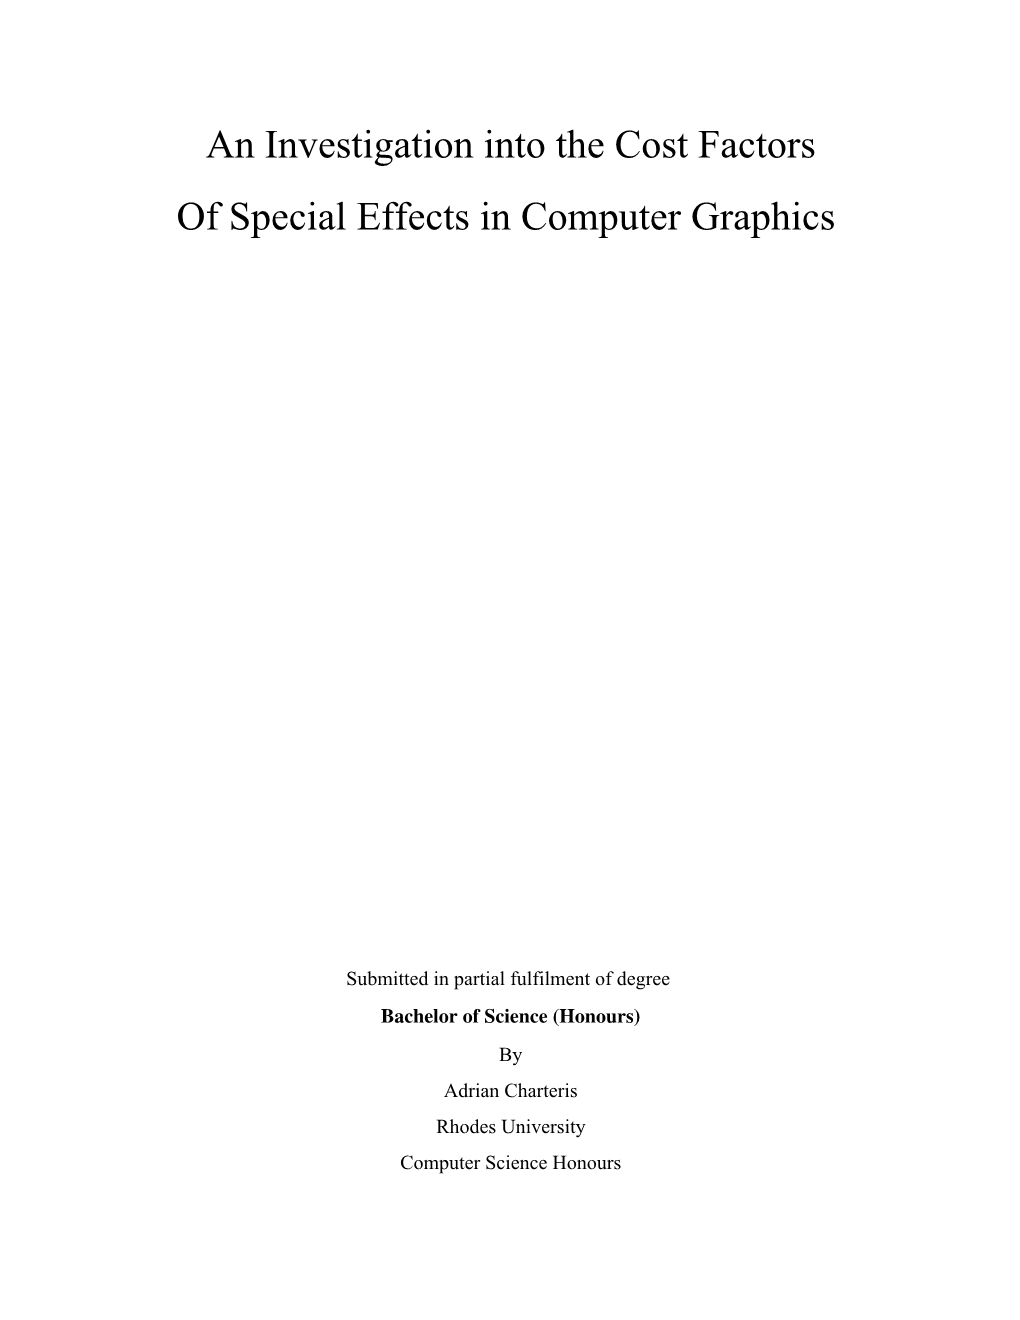 An Investigation Into the Cost Factors of Special Effects in Computer Graphics